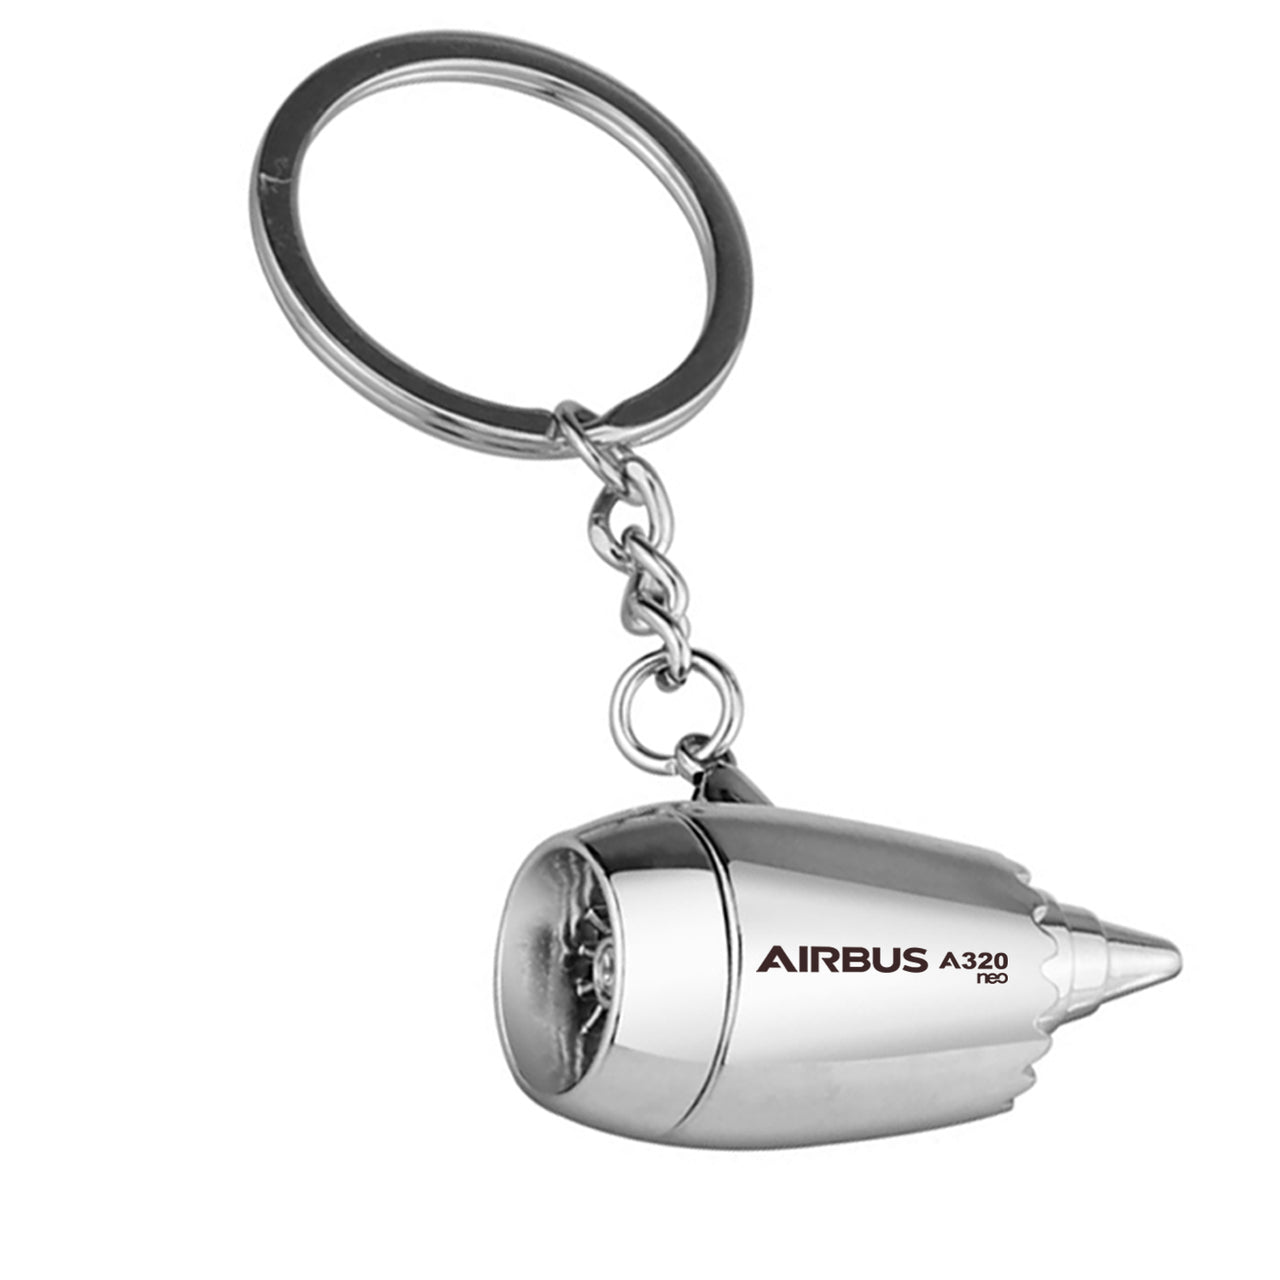 The Airbus A320Neo Designed Airplane Jet Engine Shaped Key Chain